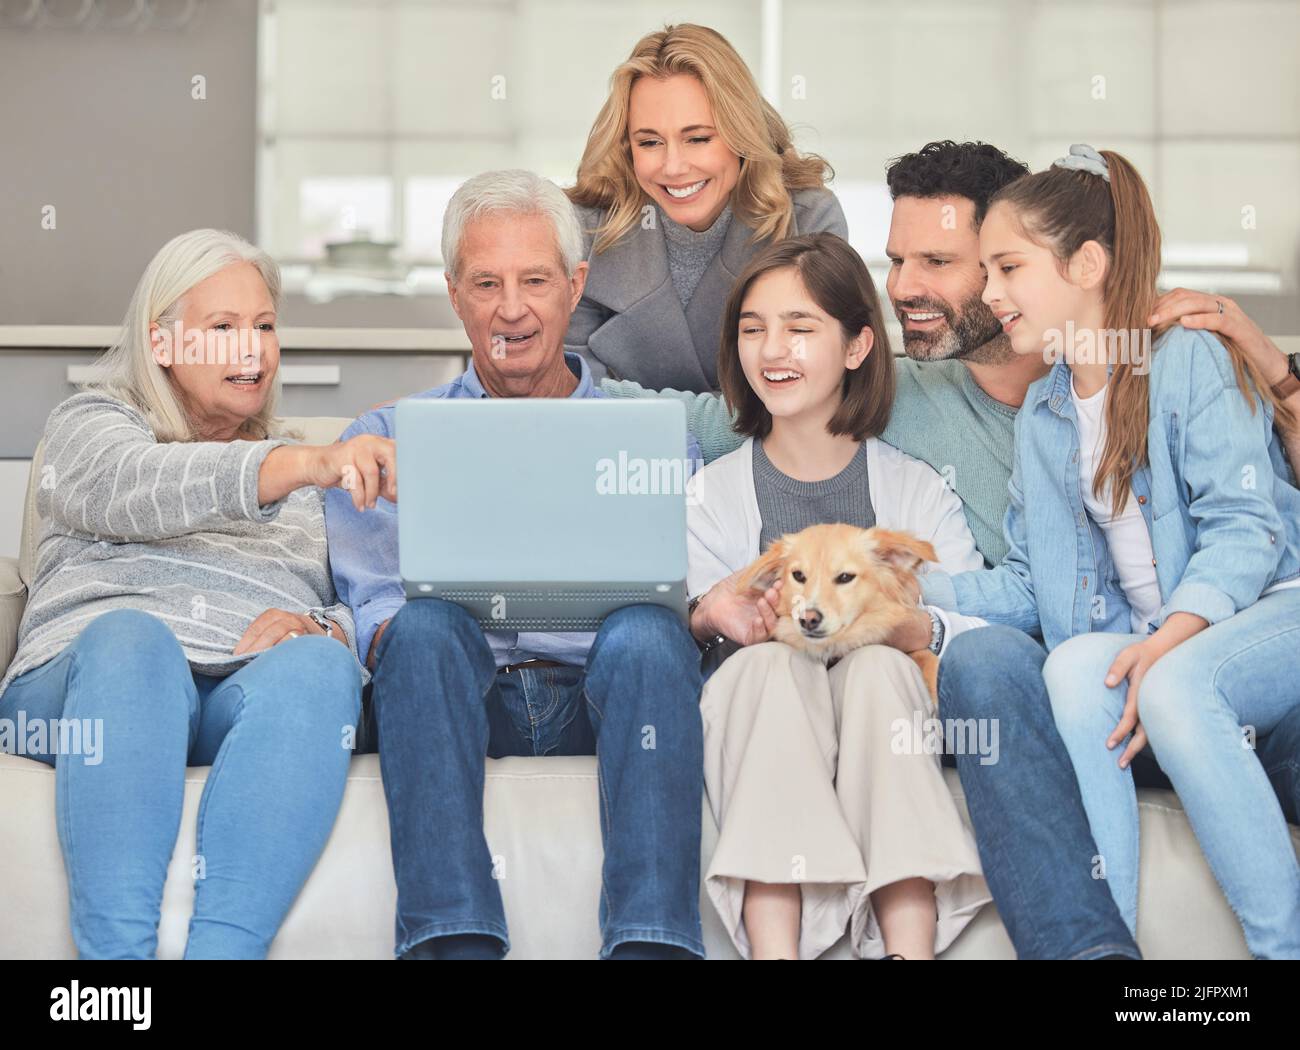 Family planning. Shot of a family using a laptop while sitting on a sofa together at home. Stock Photo